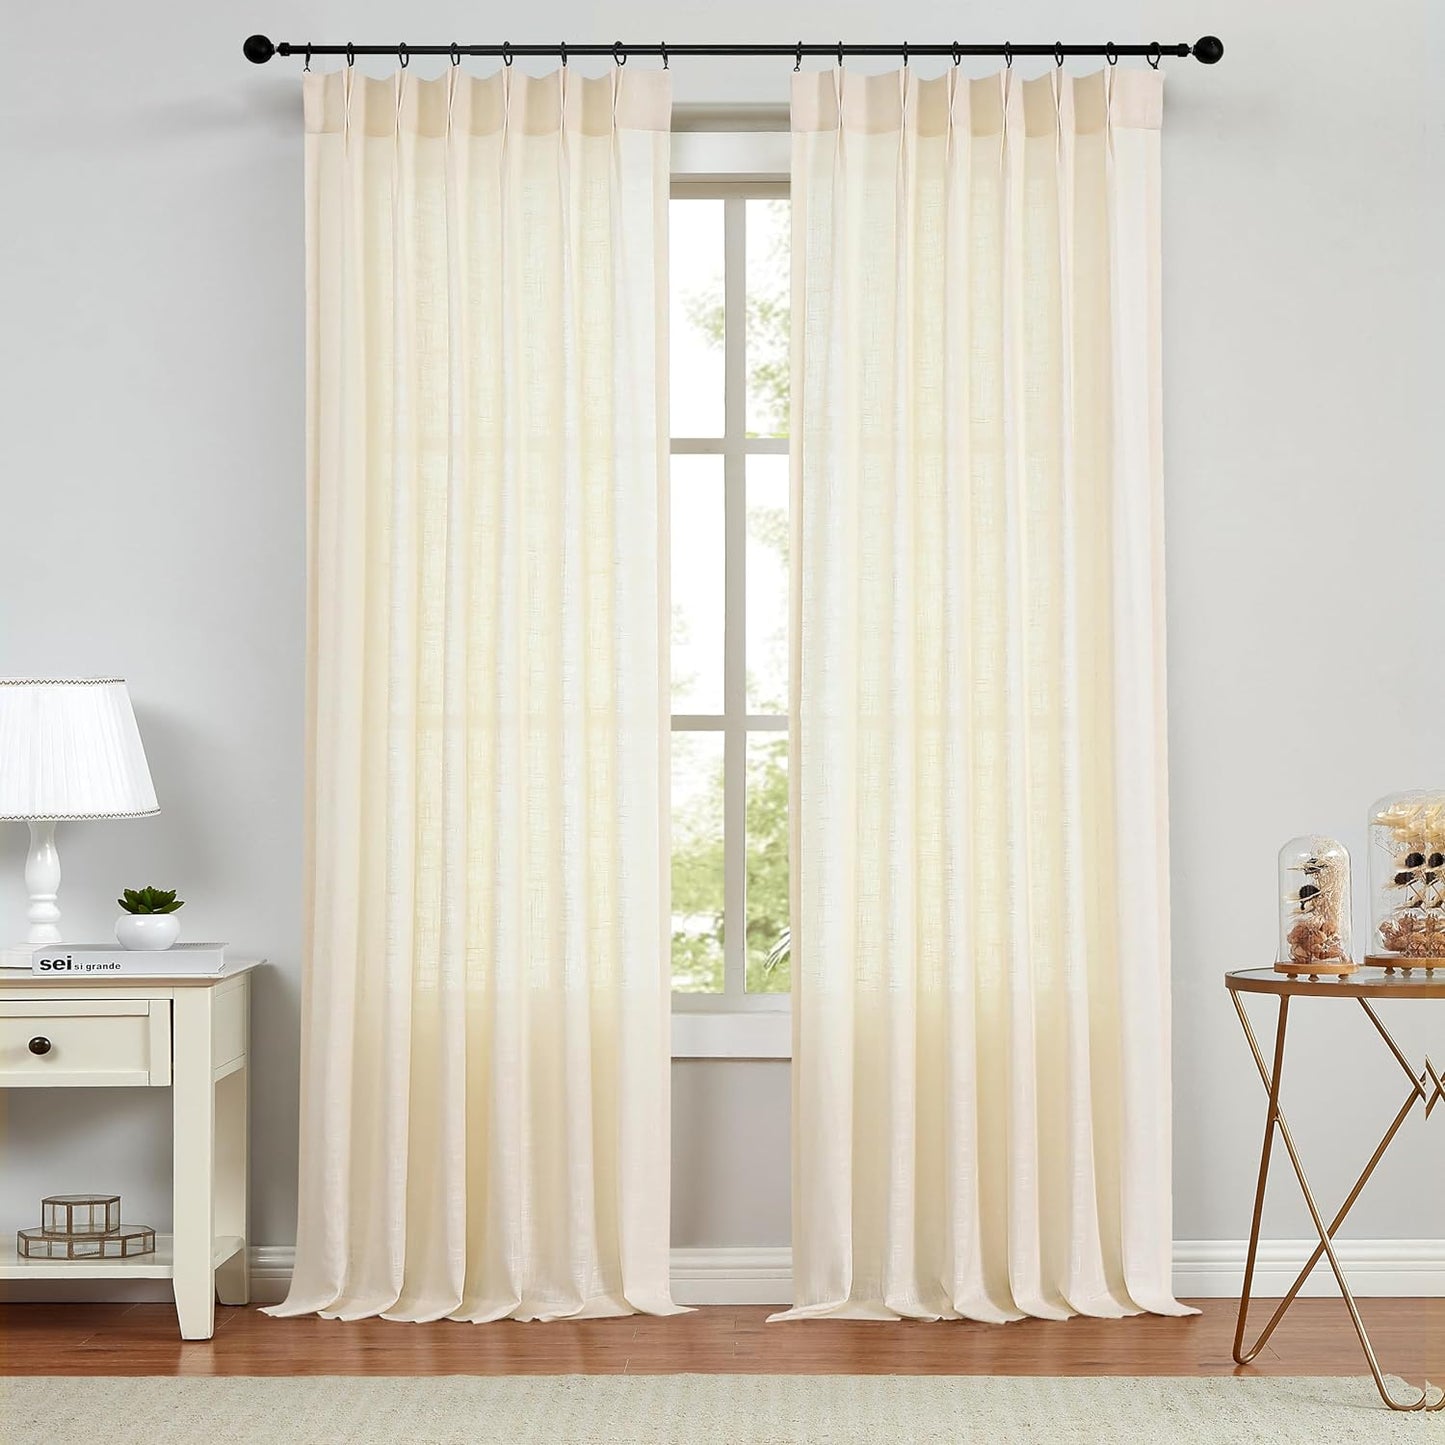 White Pinch Pleated Curtain Semi Sheer Curtain Panel Linen Cotton Blend Decorative Drape 84 Inches Long for Living Room Bedroom Farmhouse Rustic Window Treatment, White, 34"X84"X2  Central Park Ivory 34"X84"X2 